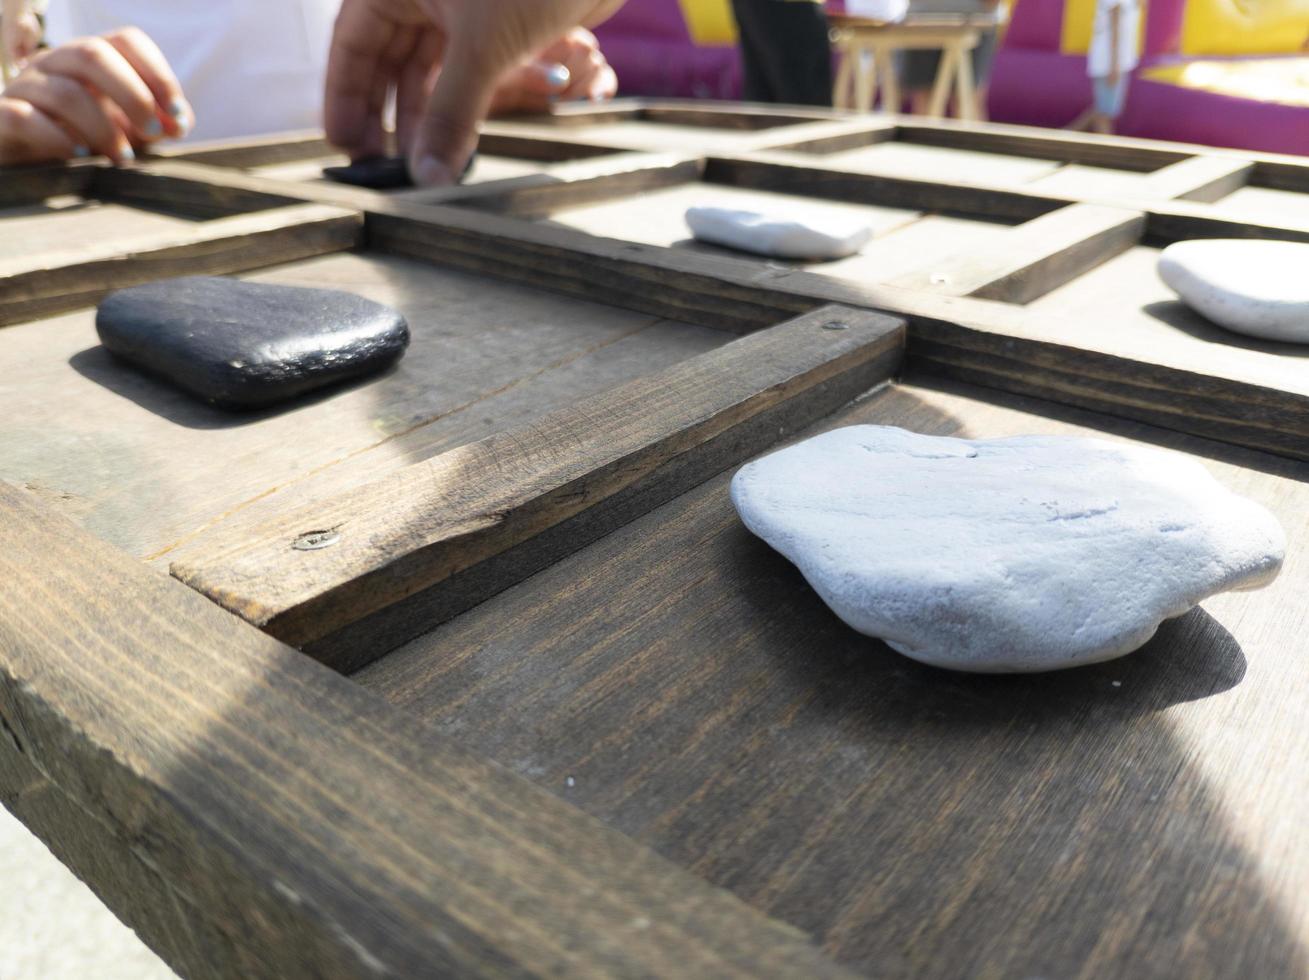 tic-tac-toe game made with wood and stones photo